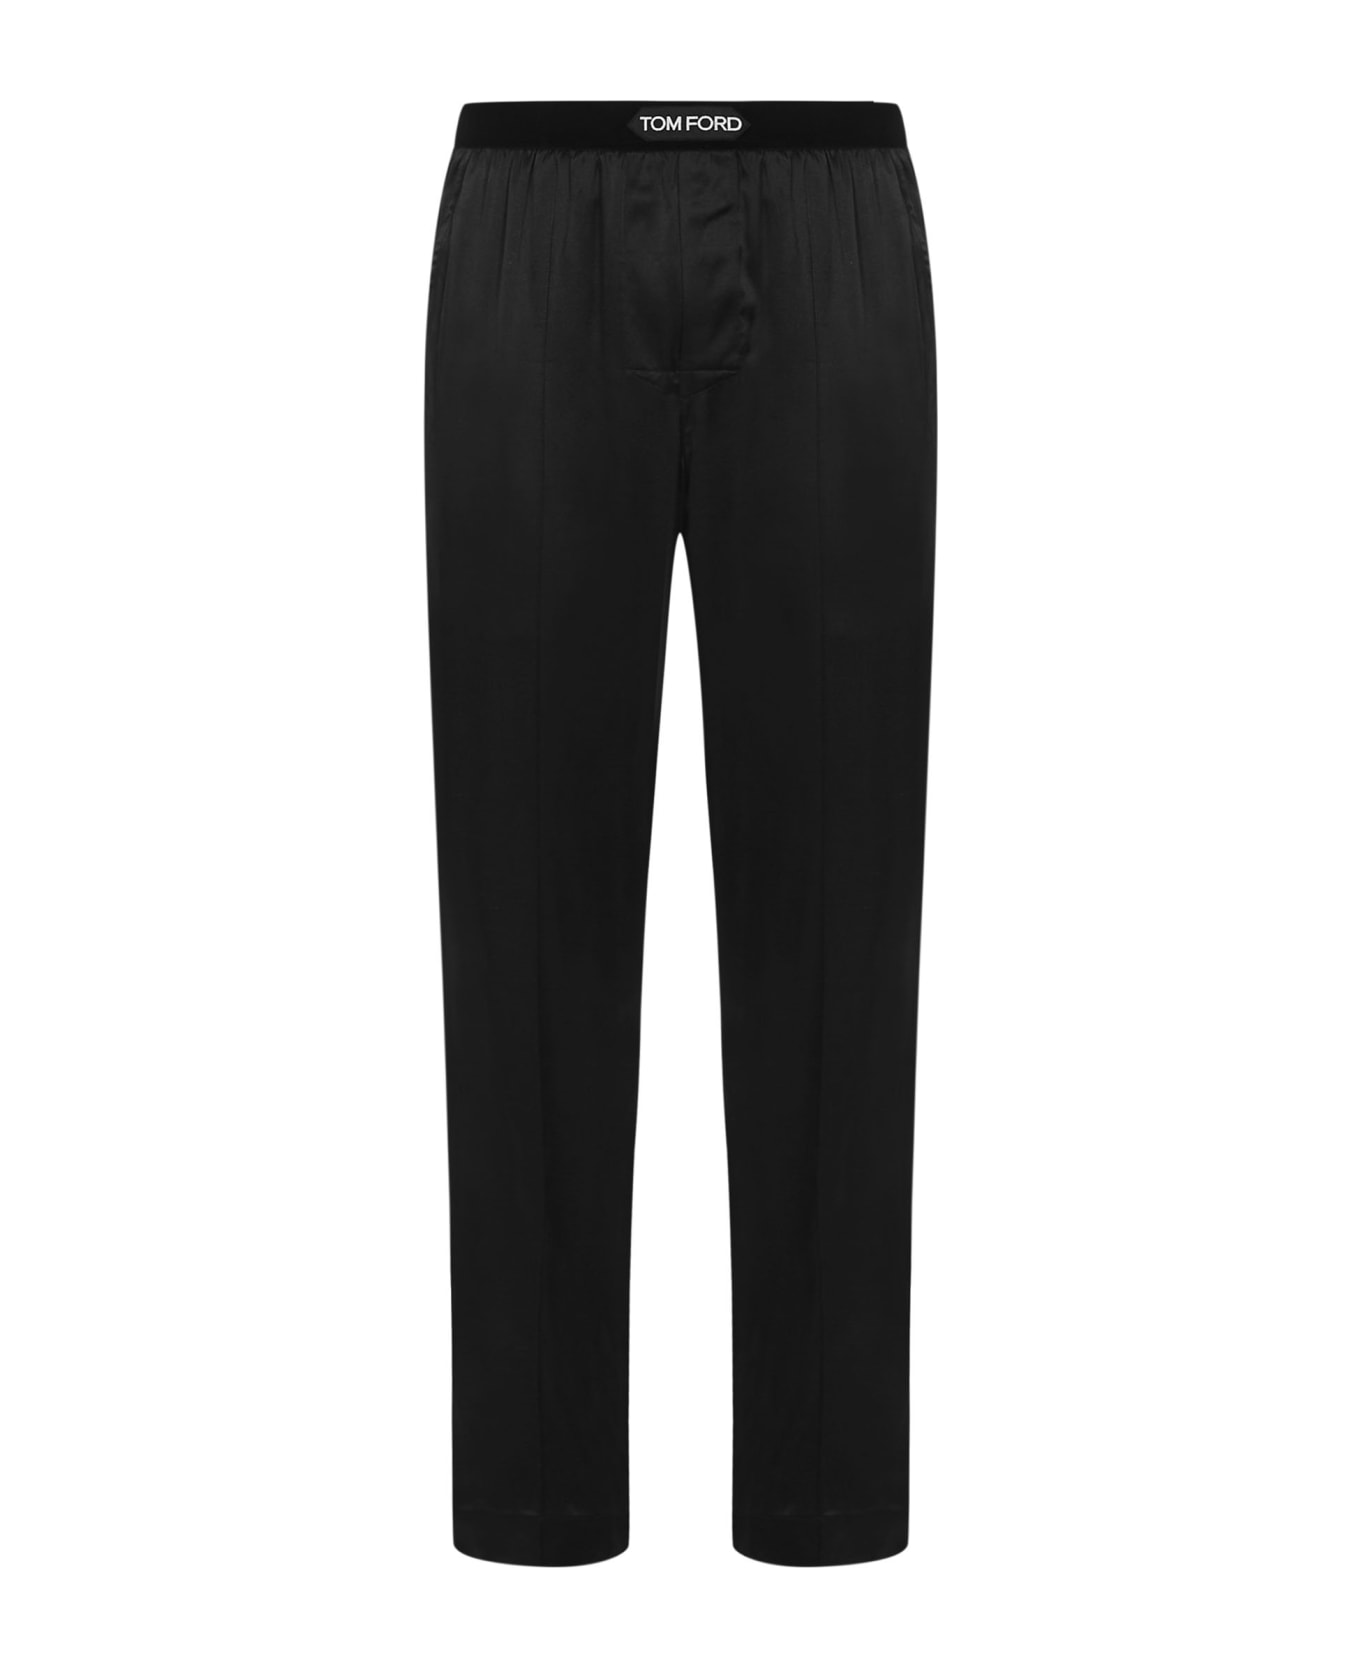 Tom Ford Trousers - NERO